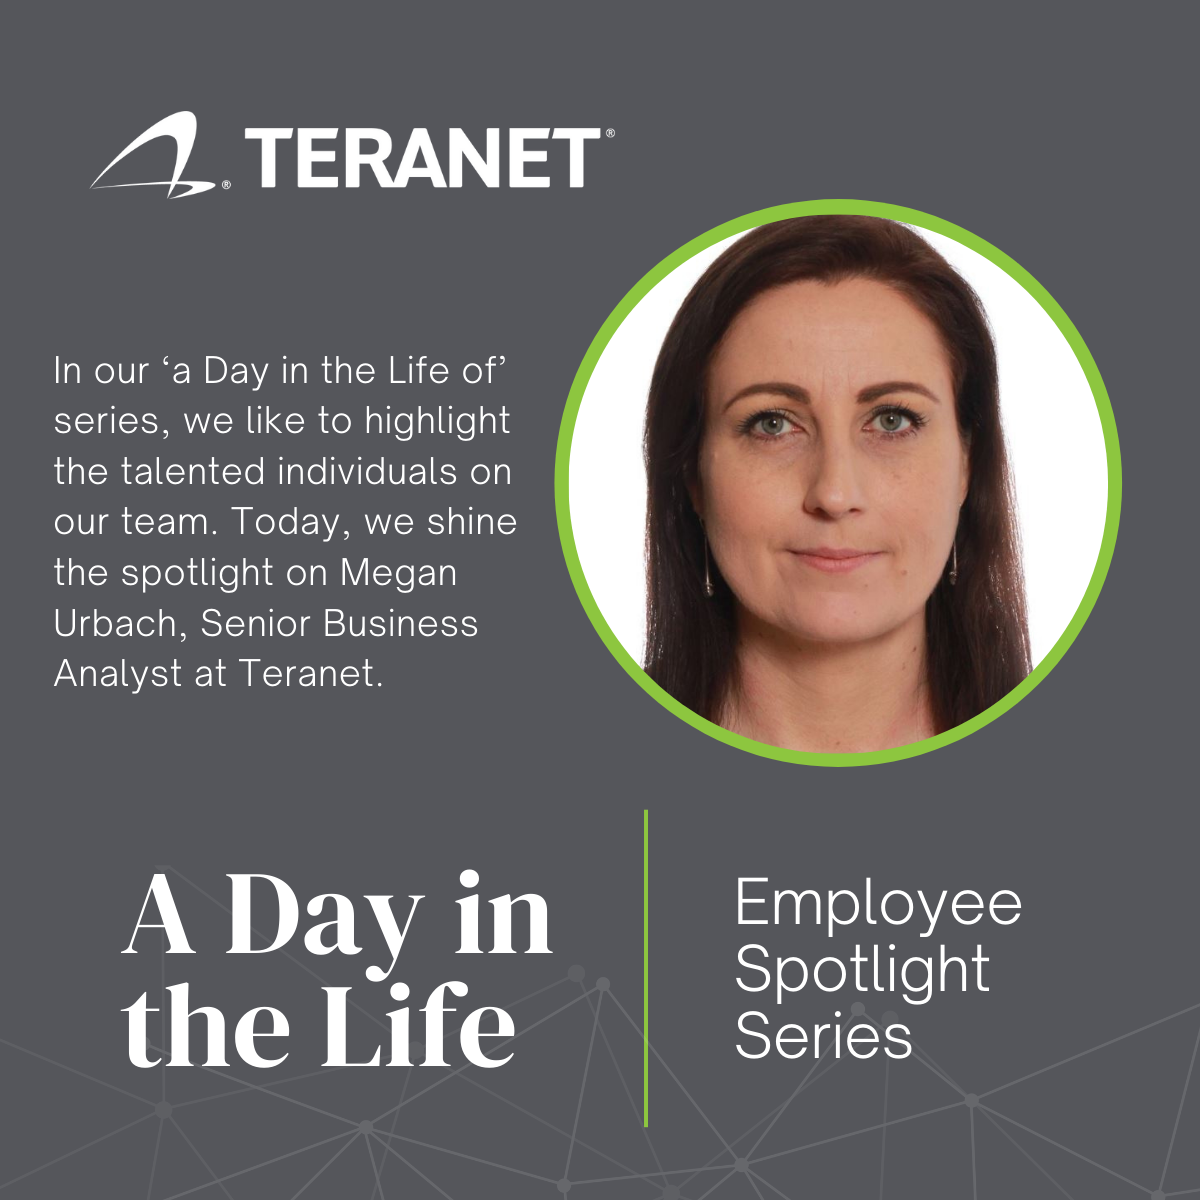 A day in the Life: Megan Urbach